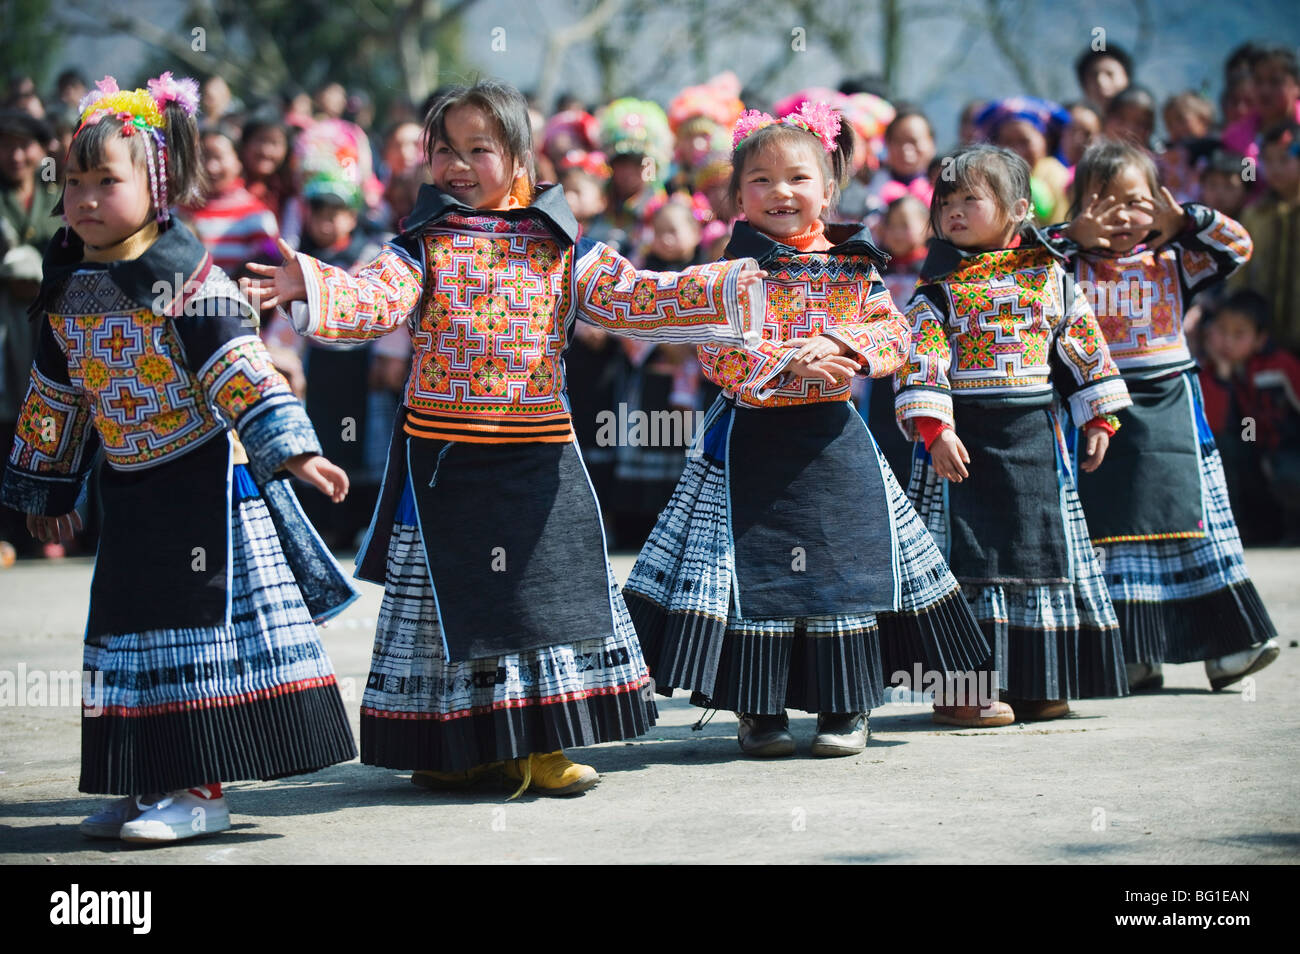 Girls in ethnic costume at a 4 Seals Miao lunar New Year festival, Xinyao village, Guizhou Province, China, Asia Stock Photo